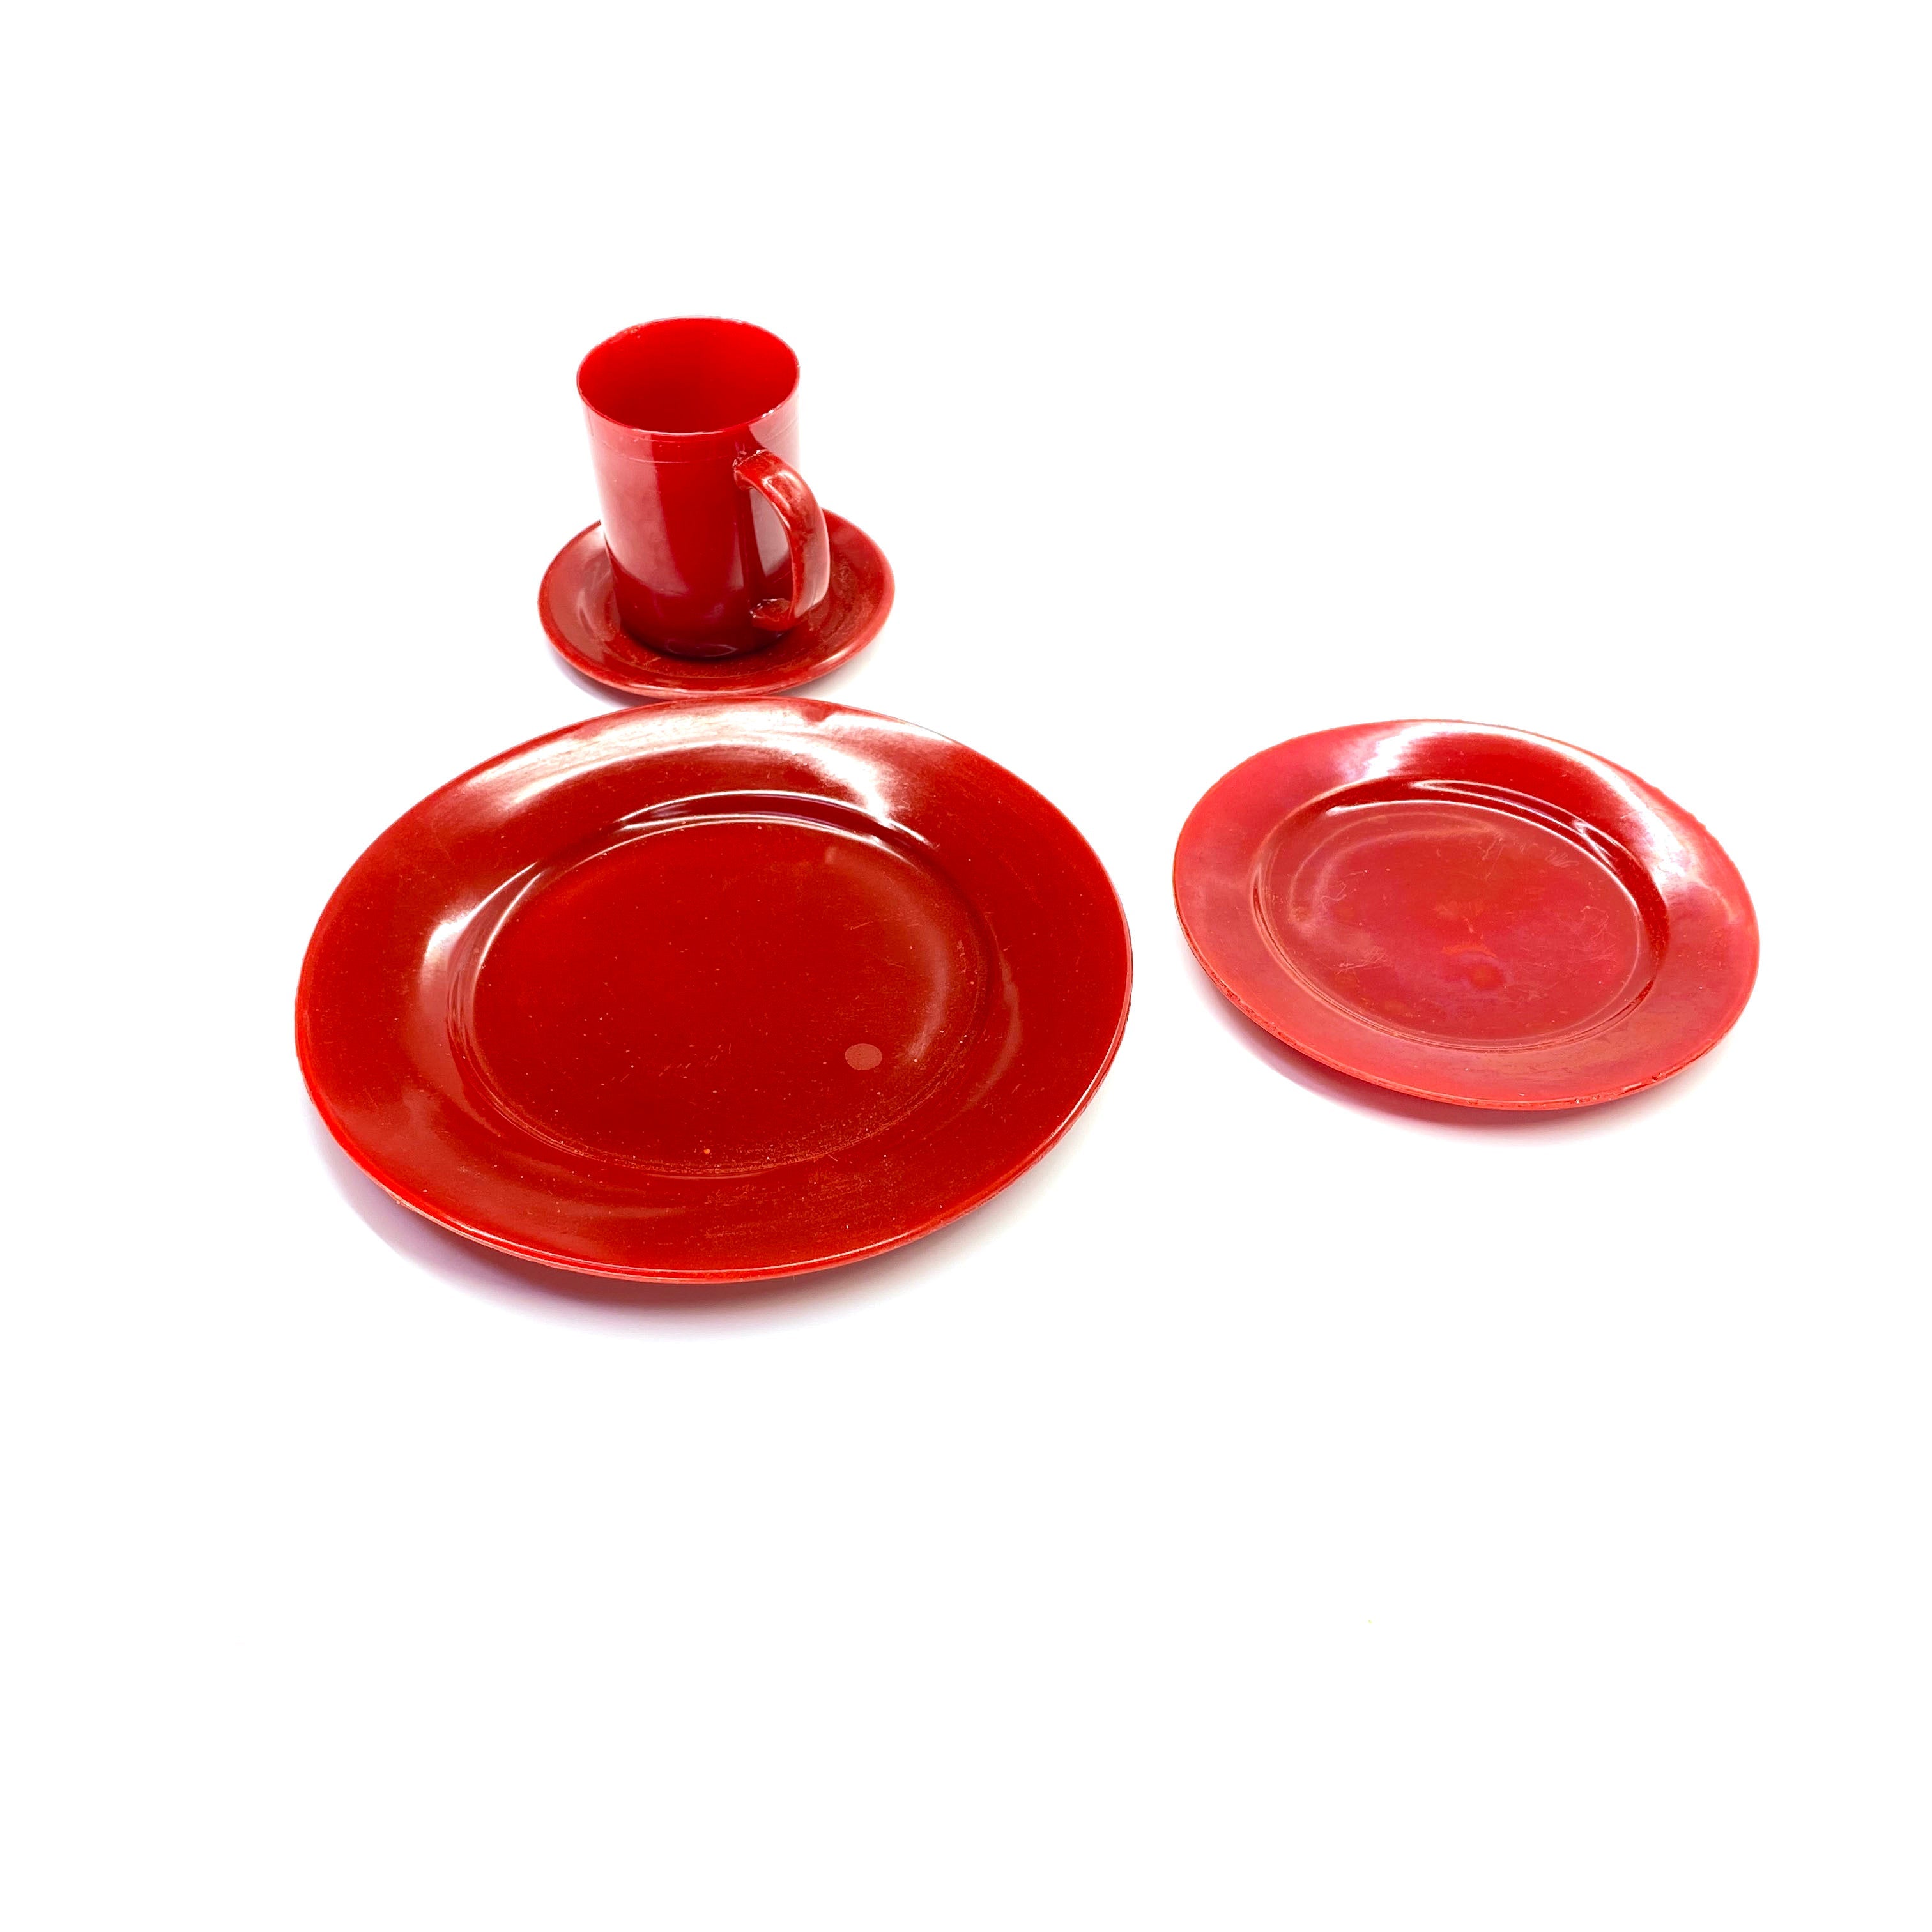 SMASHProps Breakaway 4 Piece Place Setting - RED opaque - Red,Opaque